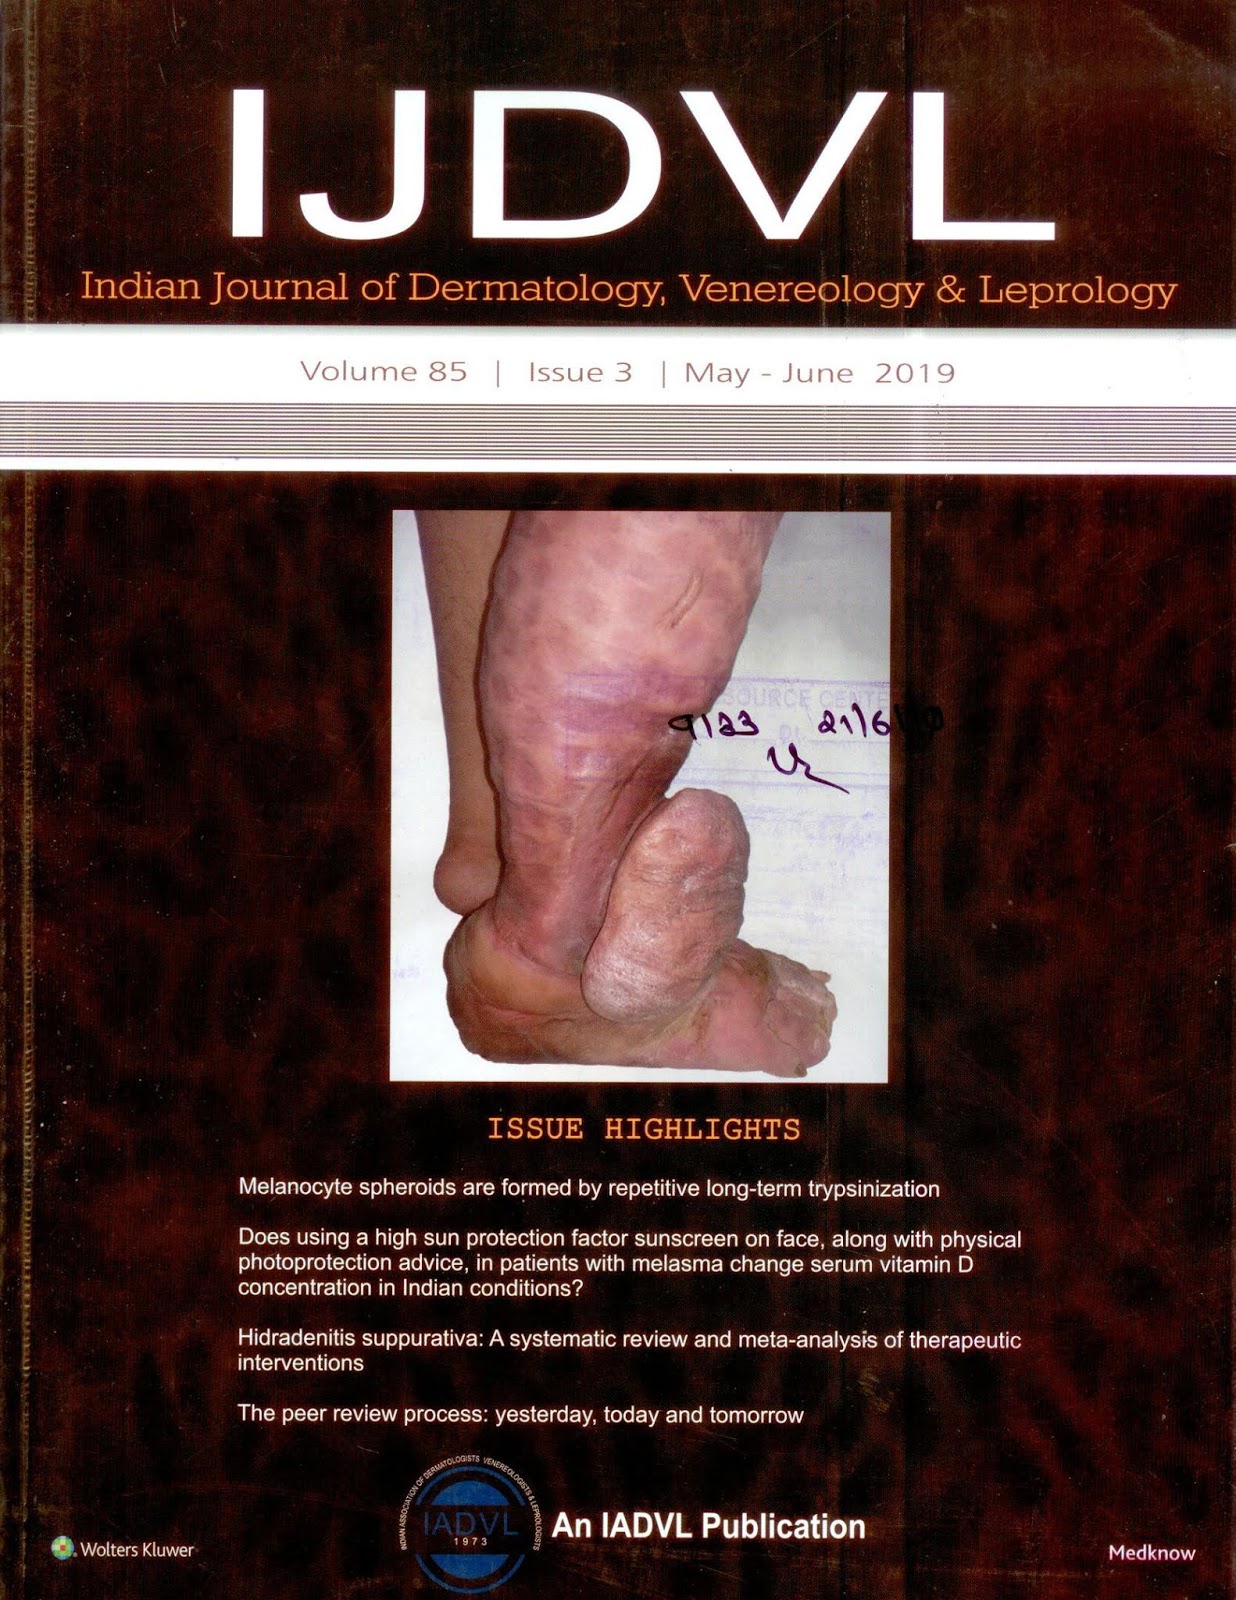 http://www.ijdvl.com/showBackIssue.asp?issn=0378-6323;year=2019;volume=85;issue=3;month=May-June